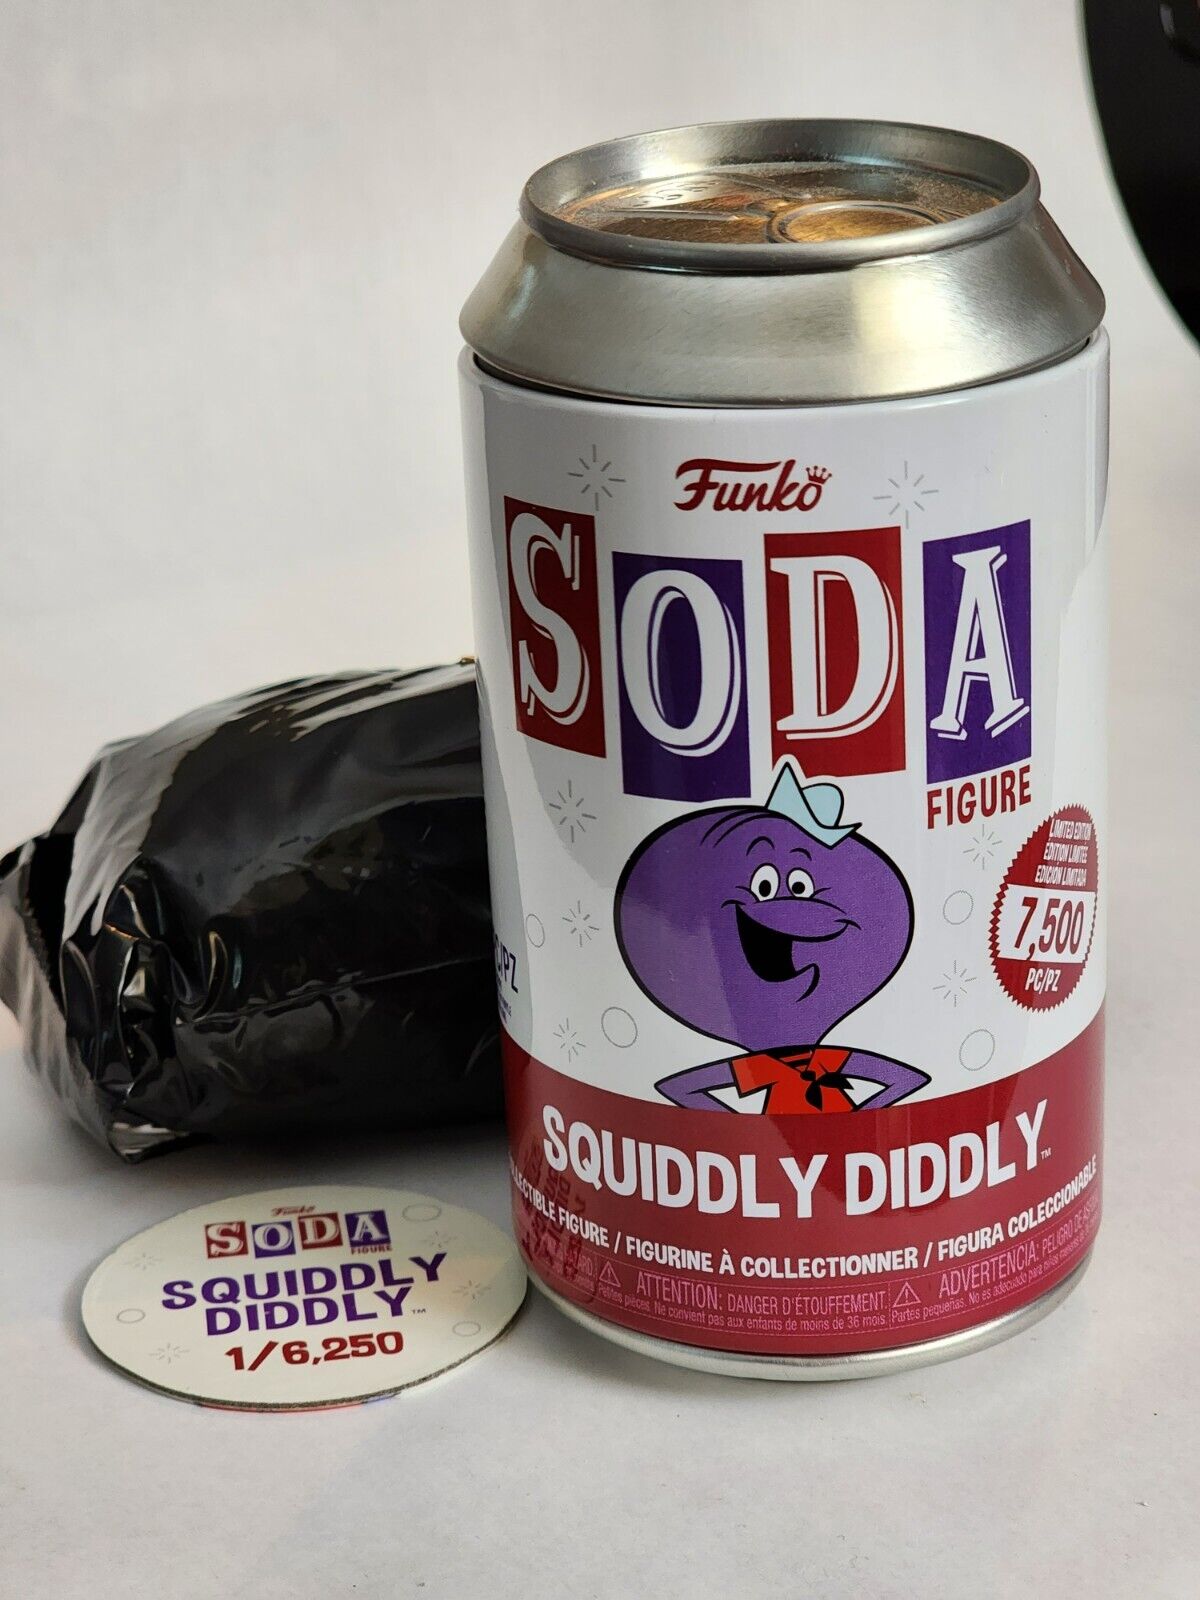 Funko Soda Squiddly Diddly Common Unopened Bag